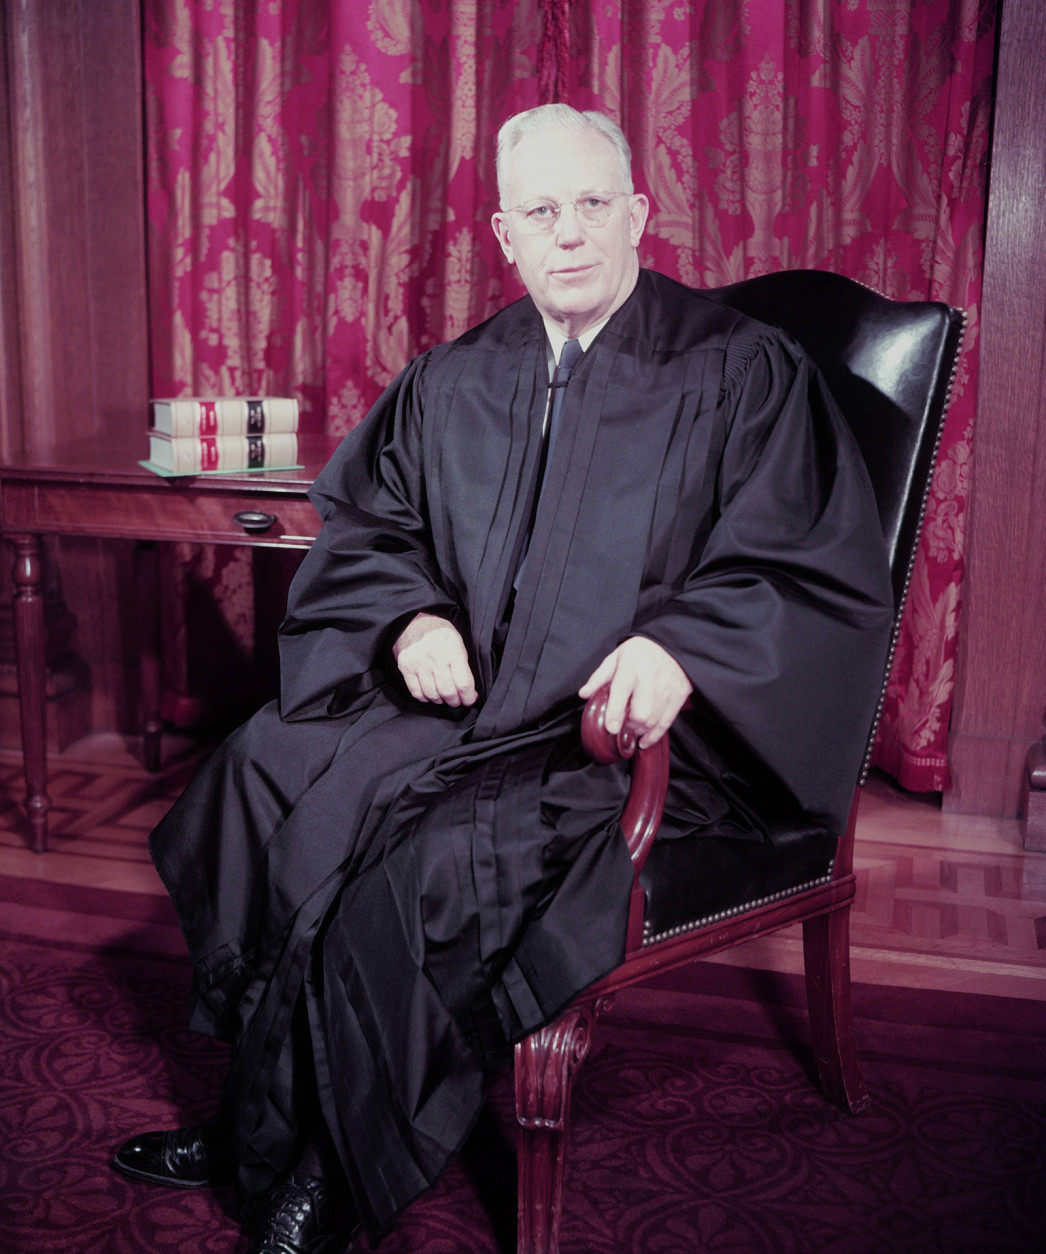 List 92+ Images during earl warren’s tenure as us chief justice Superb